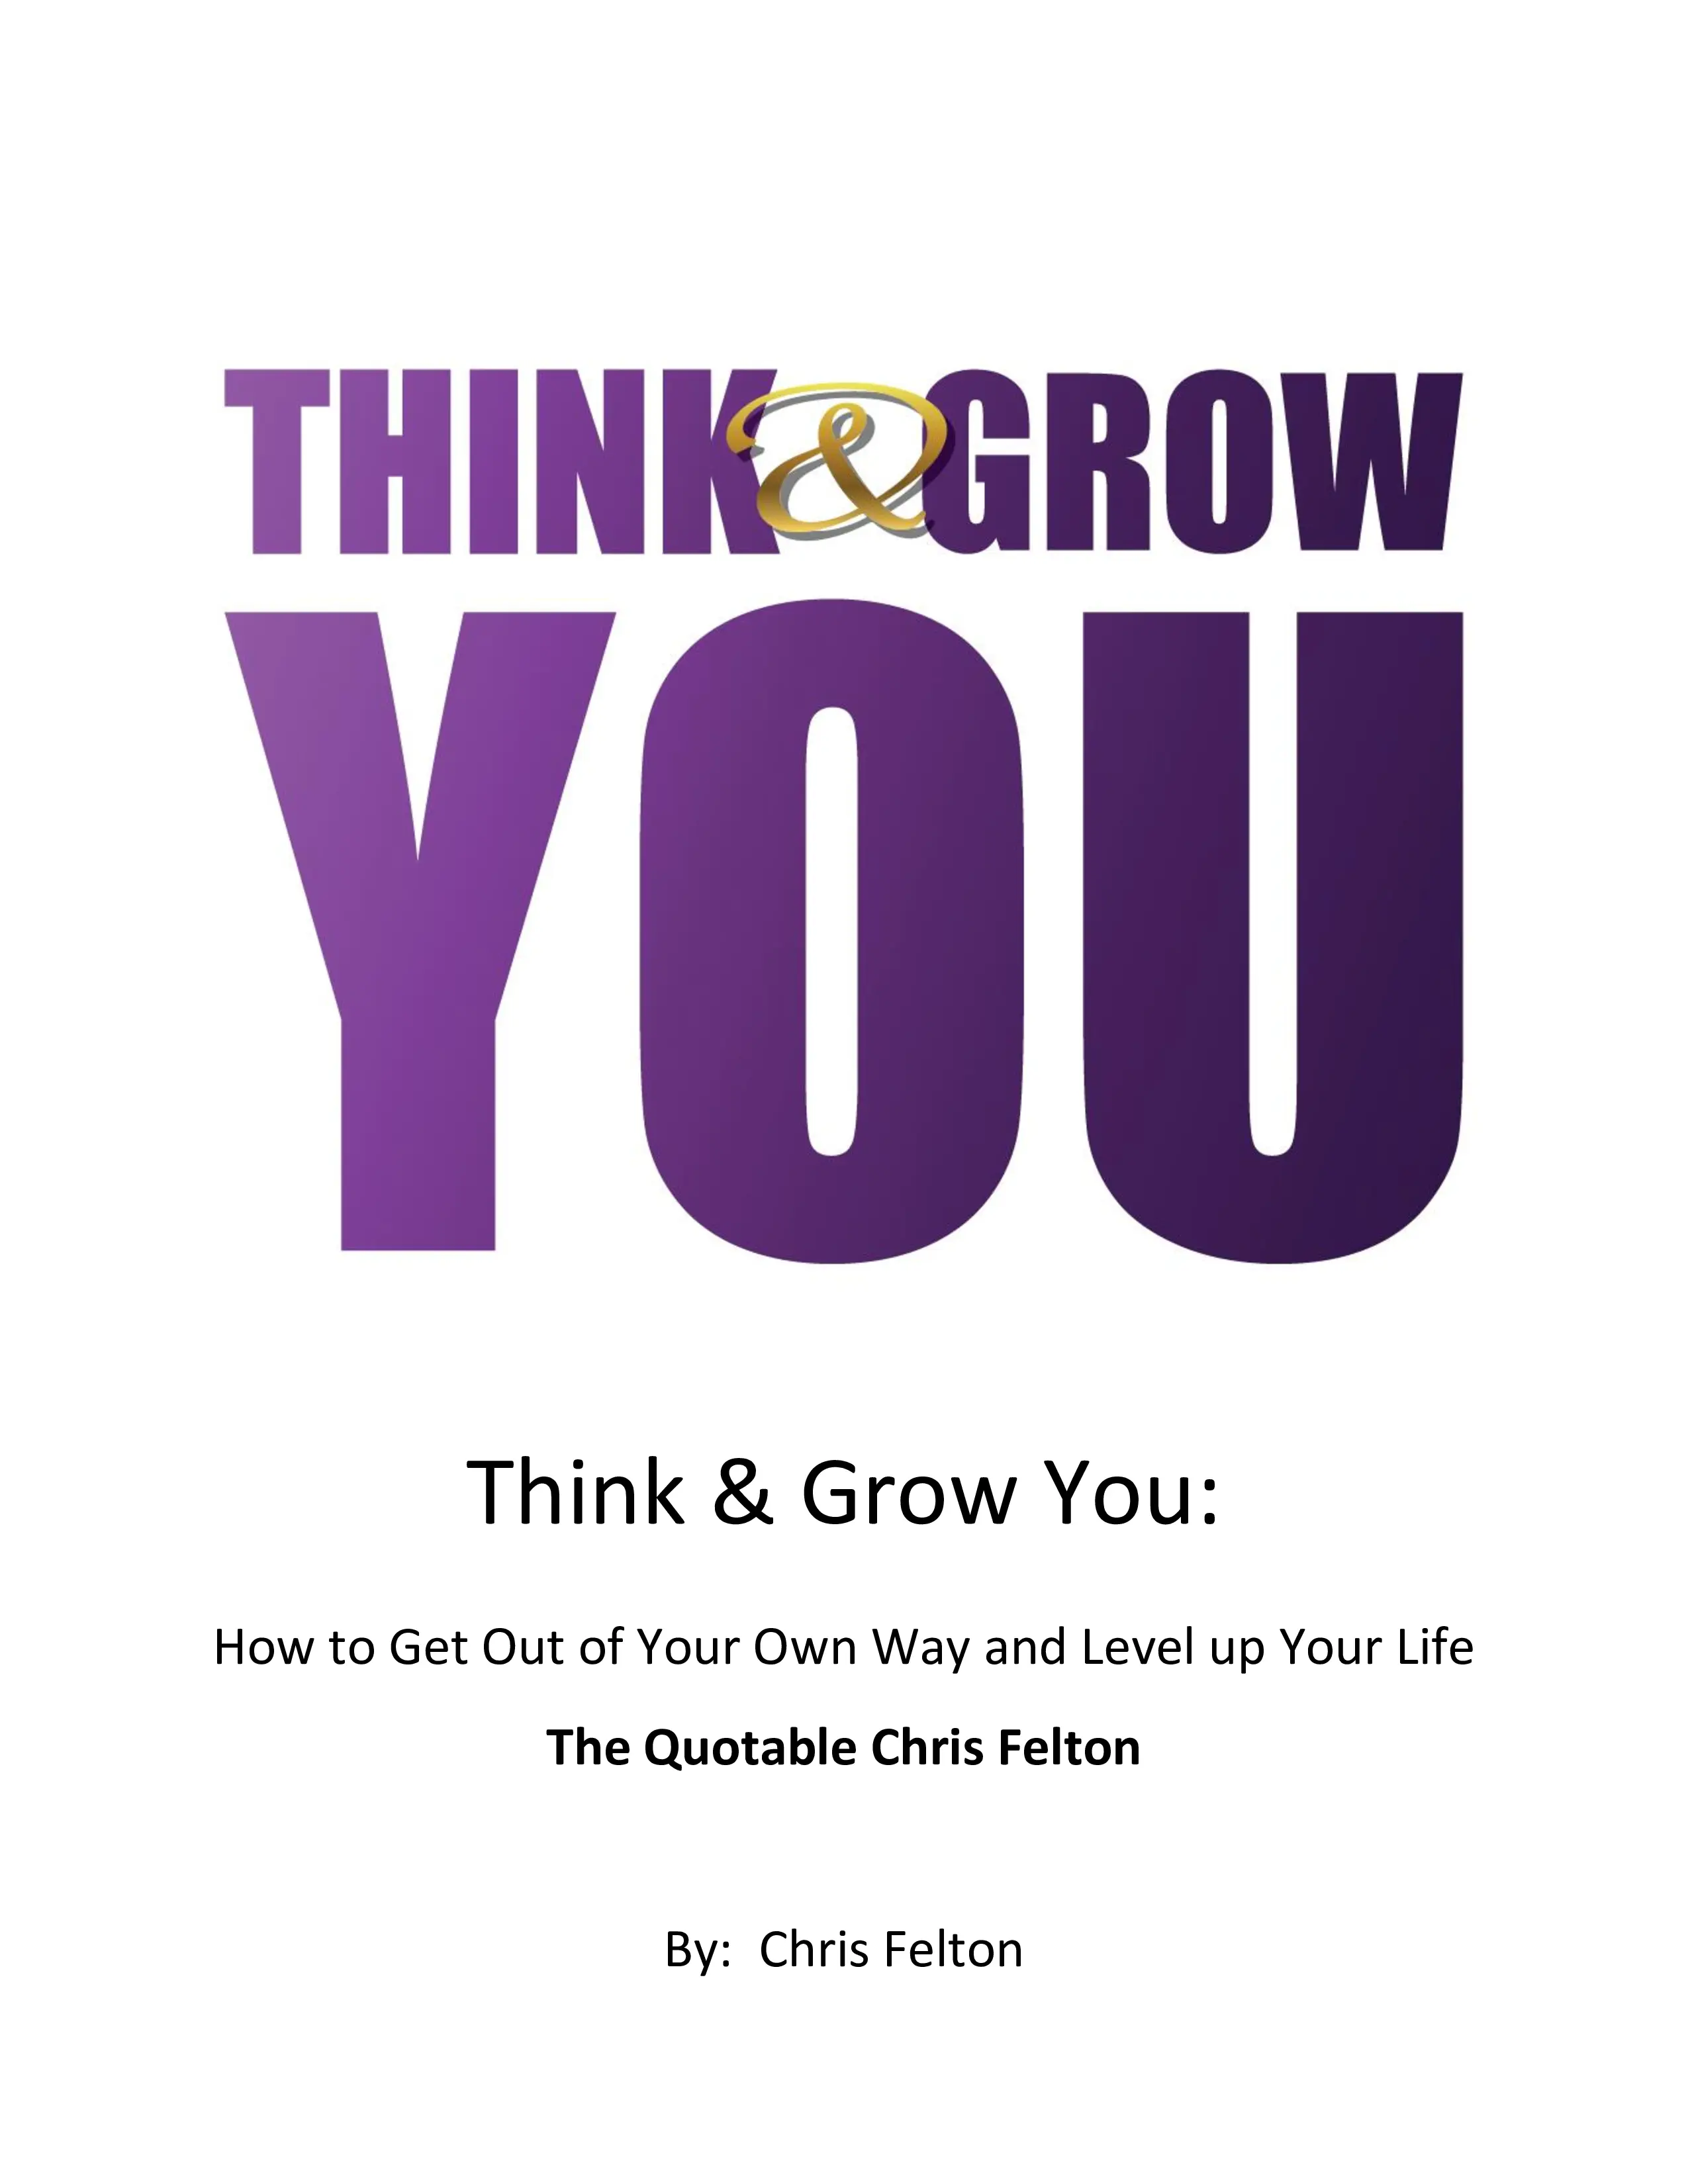 Think & Grow You book cover